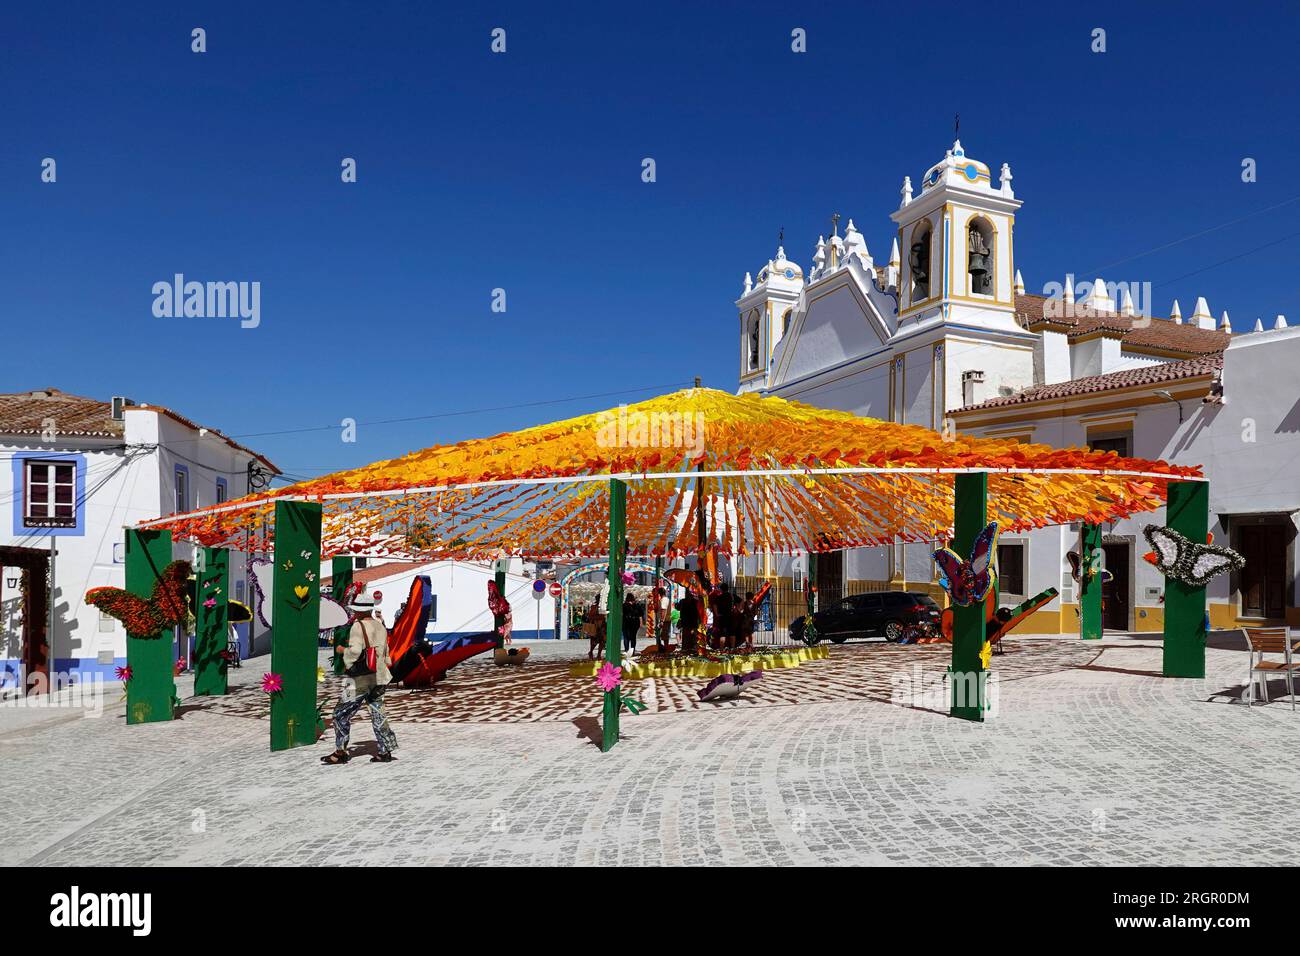 Ruas Floridas Flowered Streets festival with colourful paper flowers with the Igreja Matriz church in the back, Redondo, Alentejo, Portugal, Europe Stock Photo